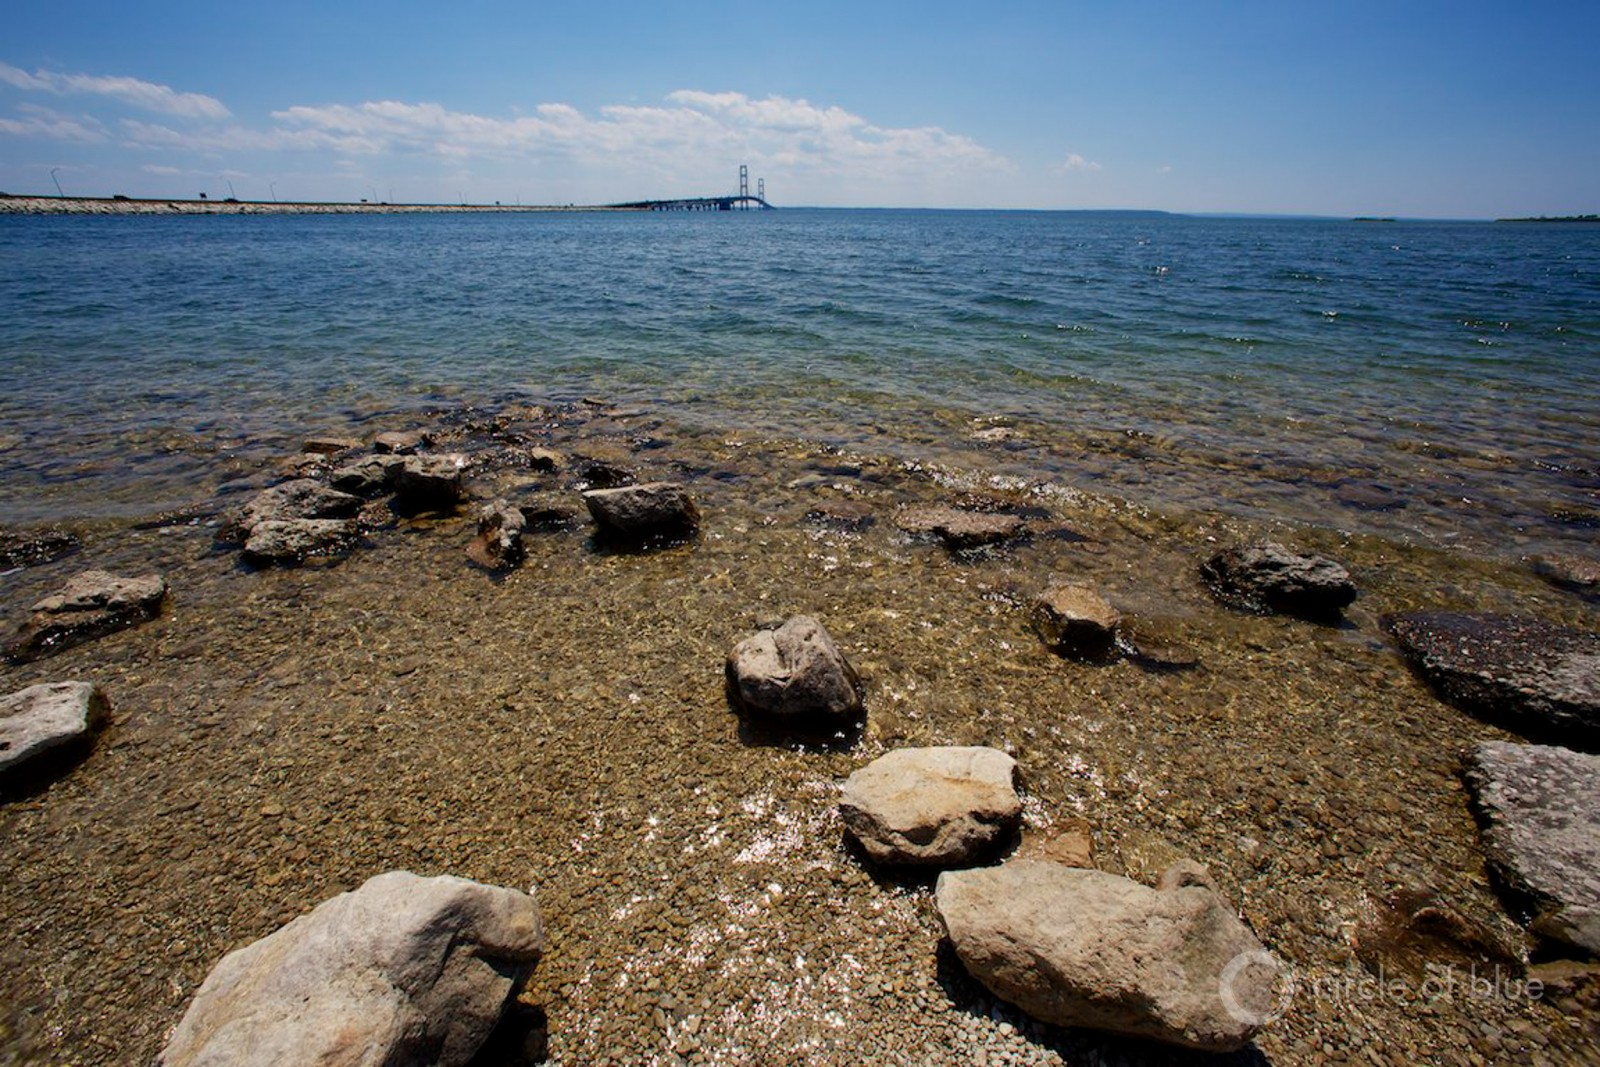 Studies have estimated that as many as 1,000 kilometers of Lake Michigan and Lake Huron shoreline are vulnerable to an oil spill from the Line 5 straits crossing, though Enbridge disputes those findings.  Photo © J. Carl Ganter / Circle of Blue